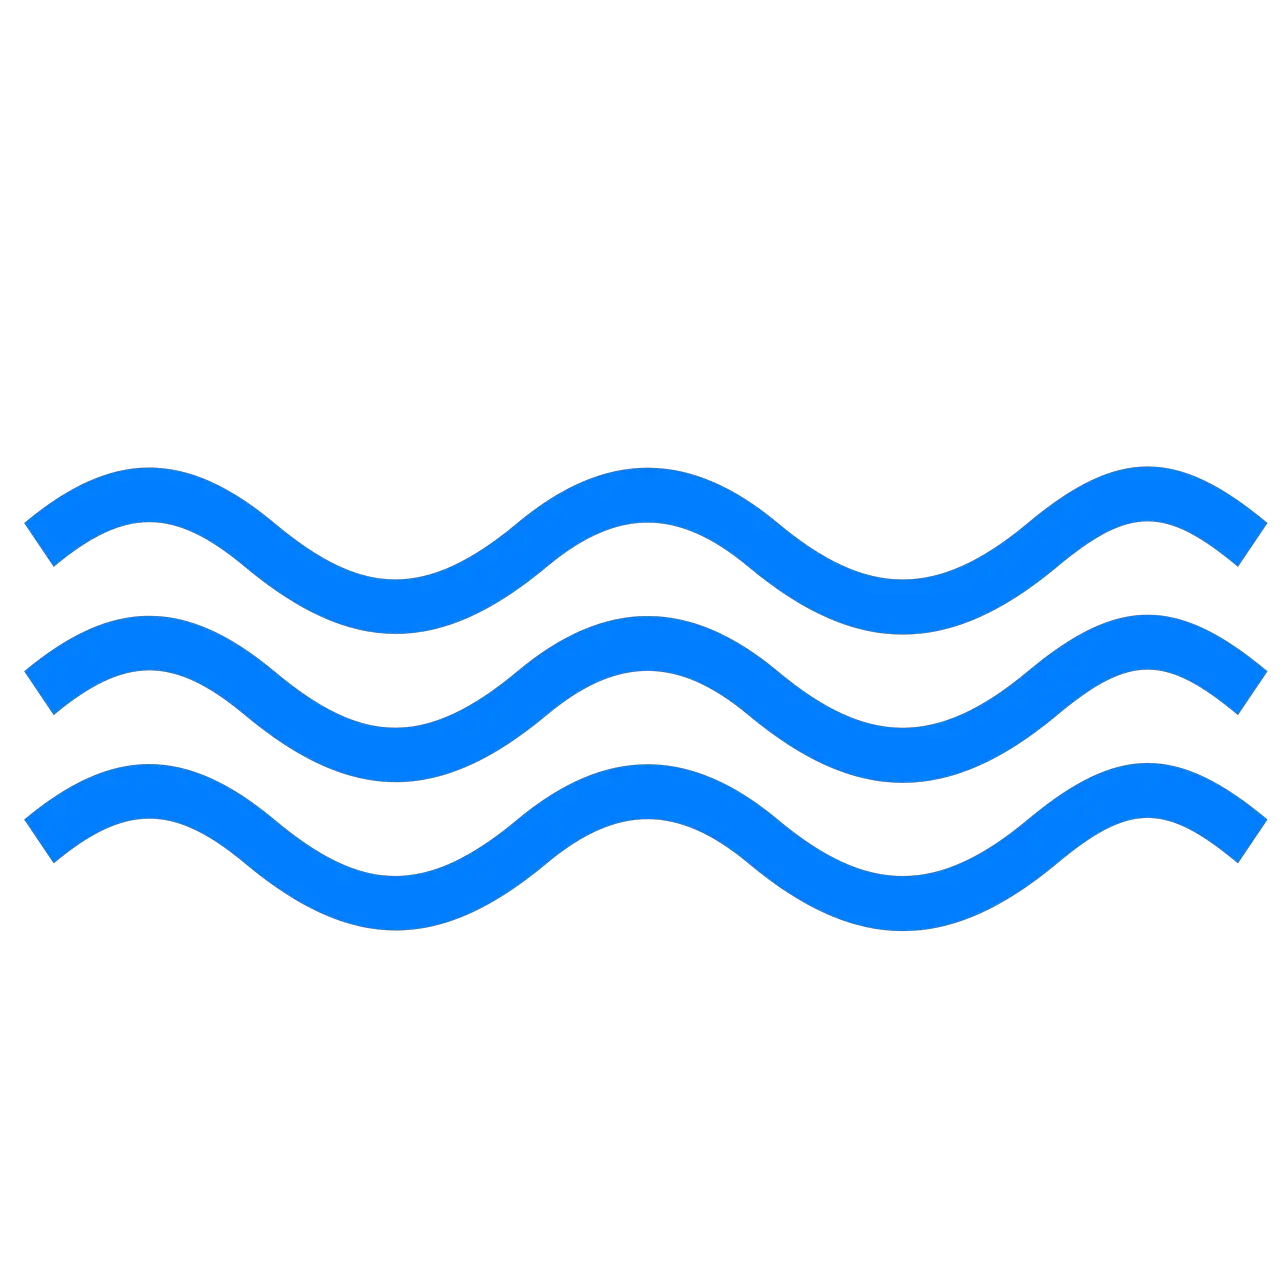 Water Wave Drip Free Image On Pixabay Water Waves Png Clipart Drip Png